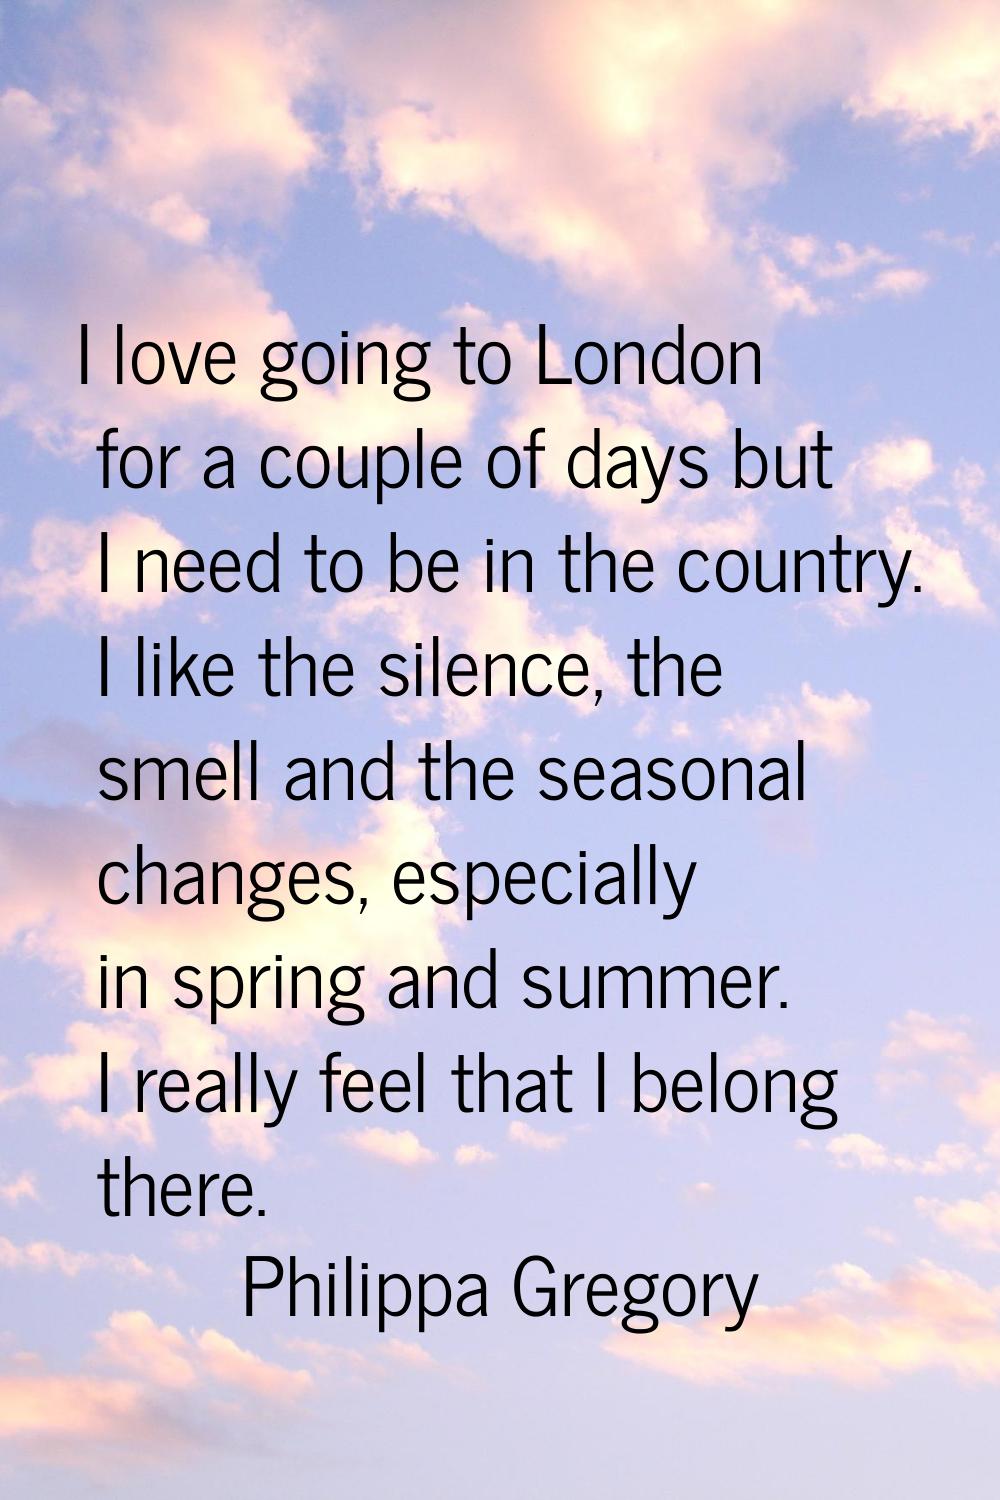 I love going to London for a couple of days but I need to be in the country. I like the silence, th